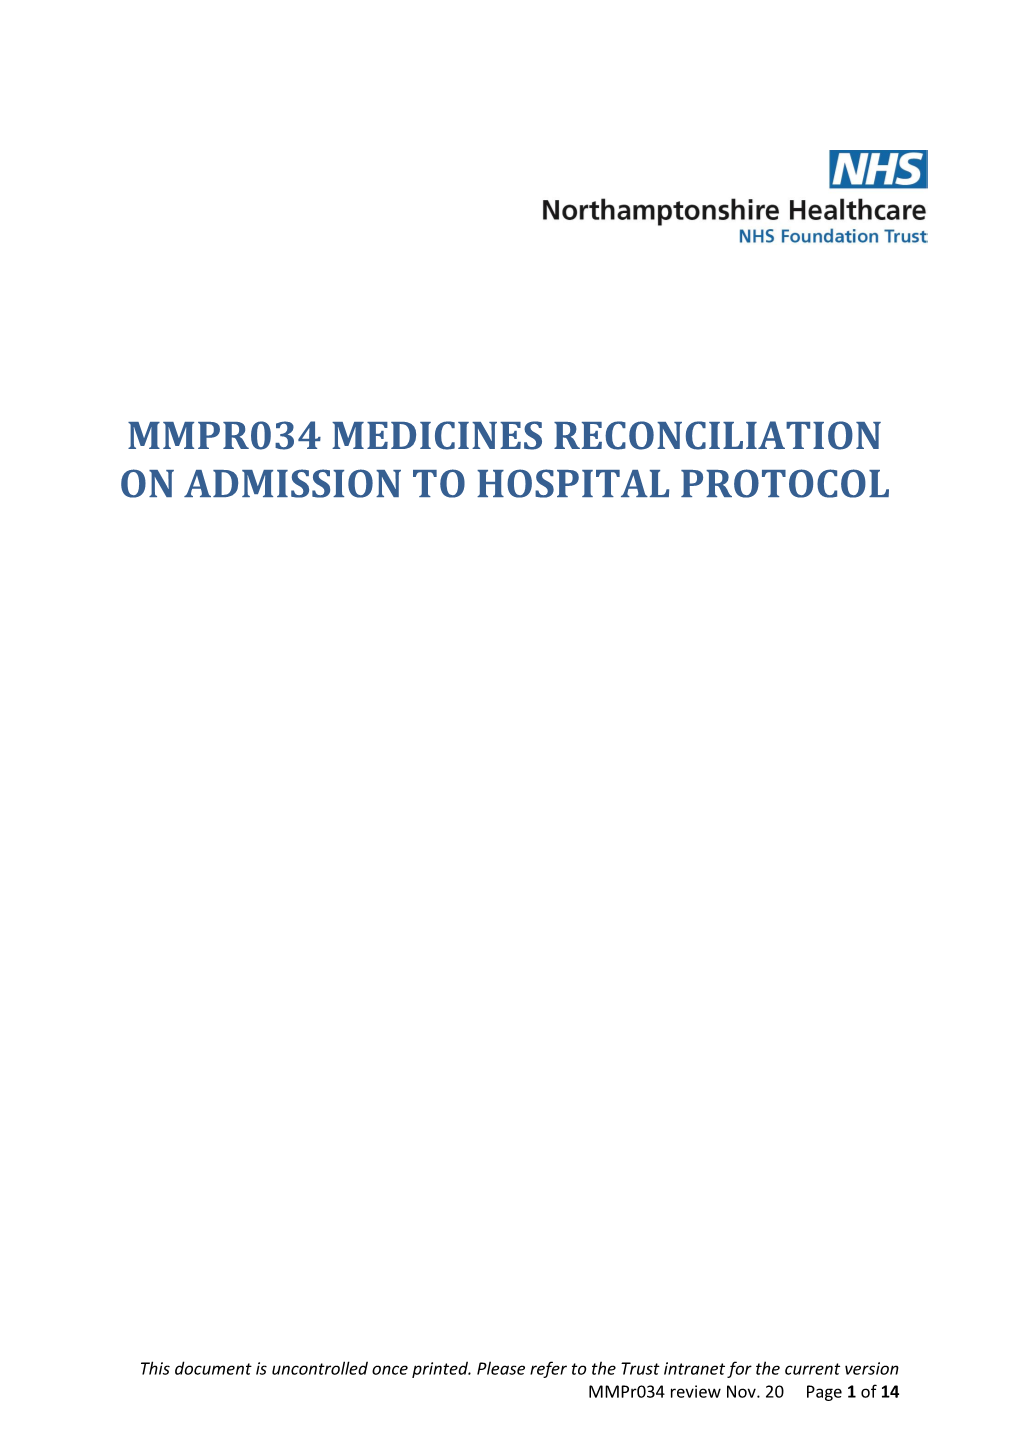 Mmpr034 Medicines Reconciliation on Admission to Hospital Protocol